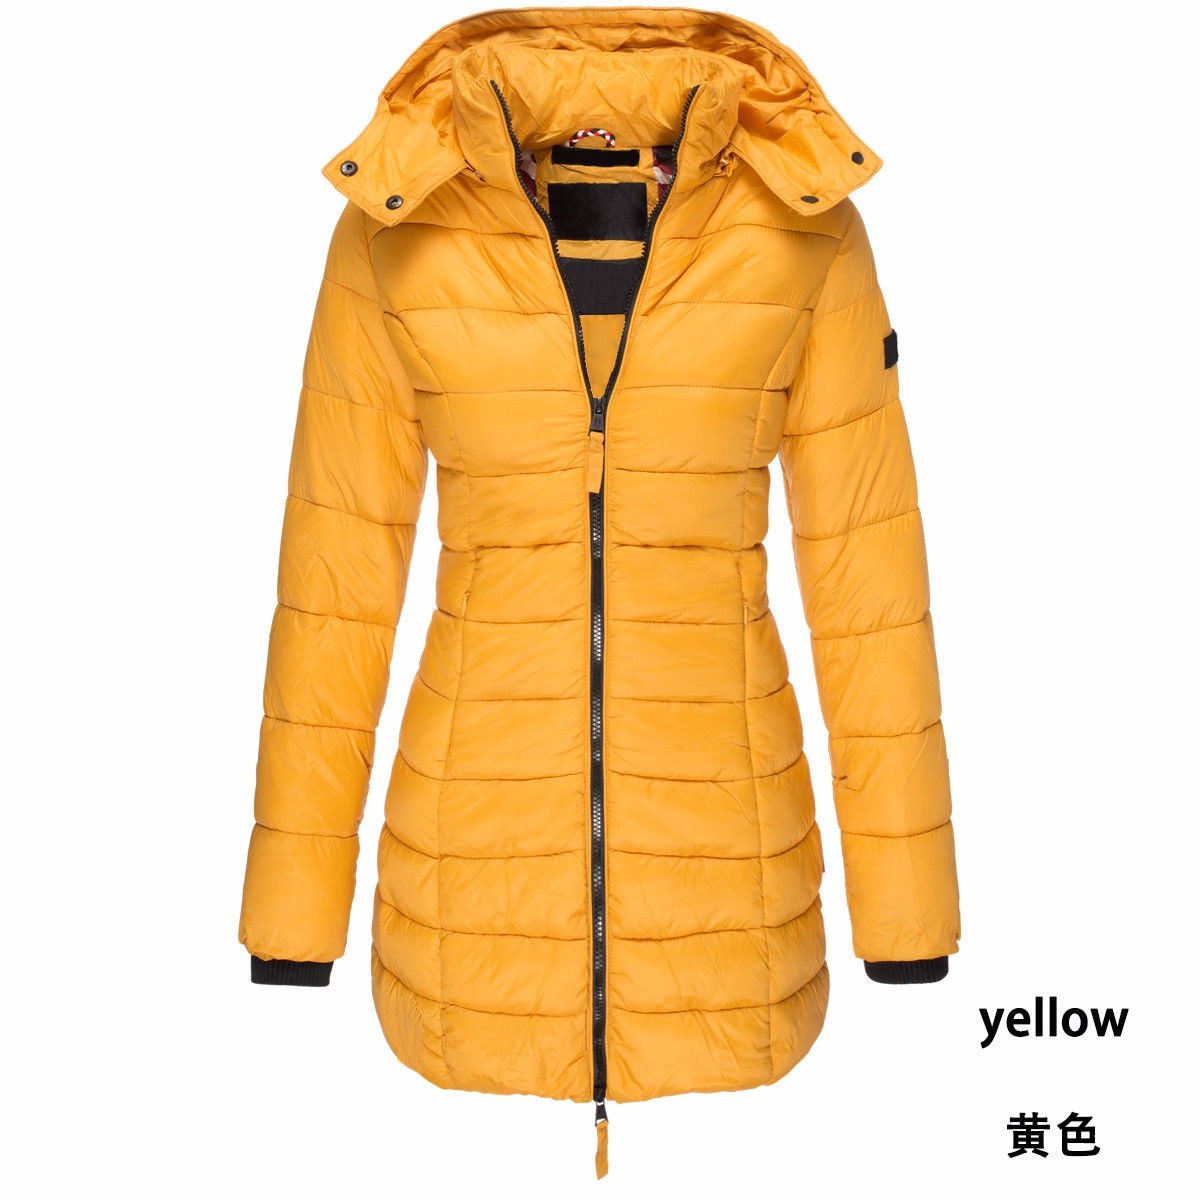 Womens Winter Long Down Coat Thicken Warm Hooded Cotton Padded Puffer Jacket Overcoat